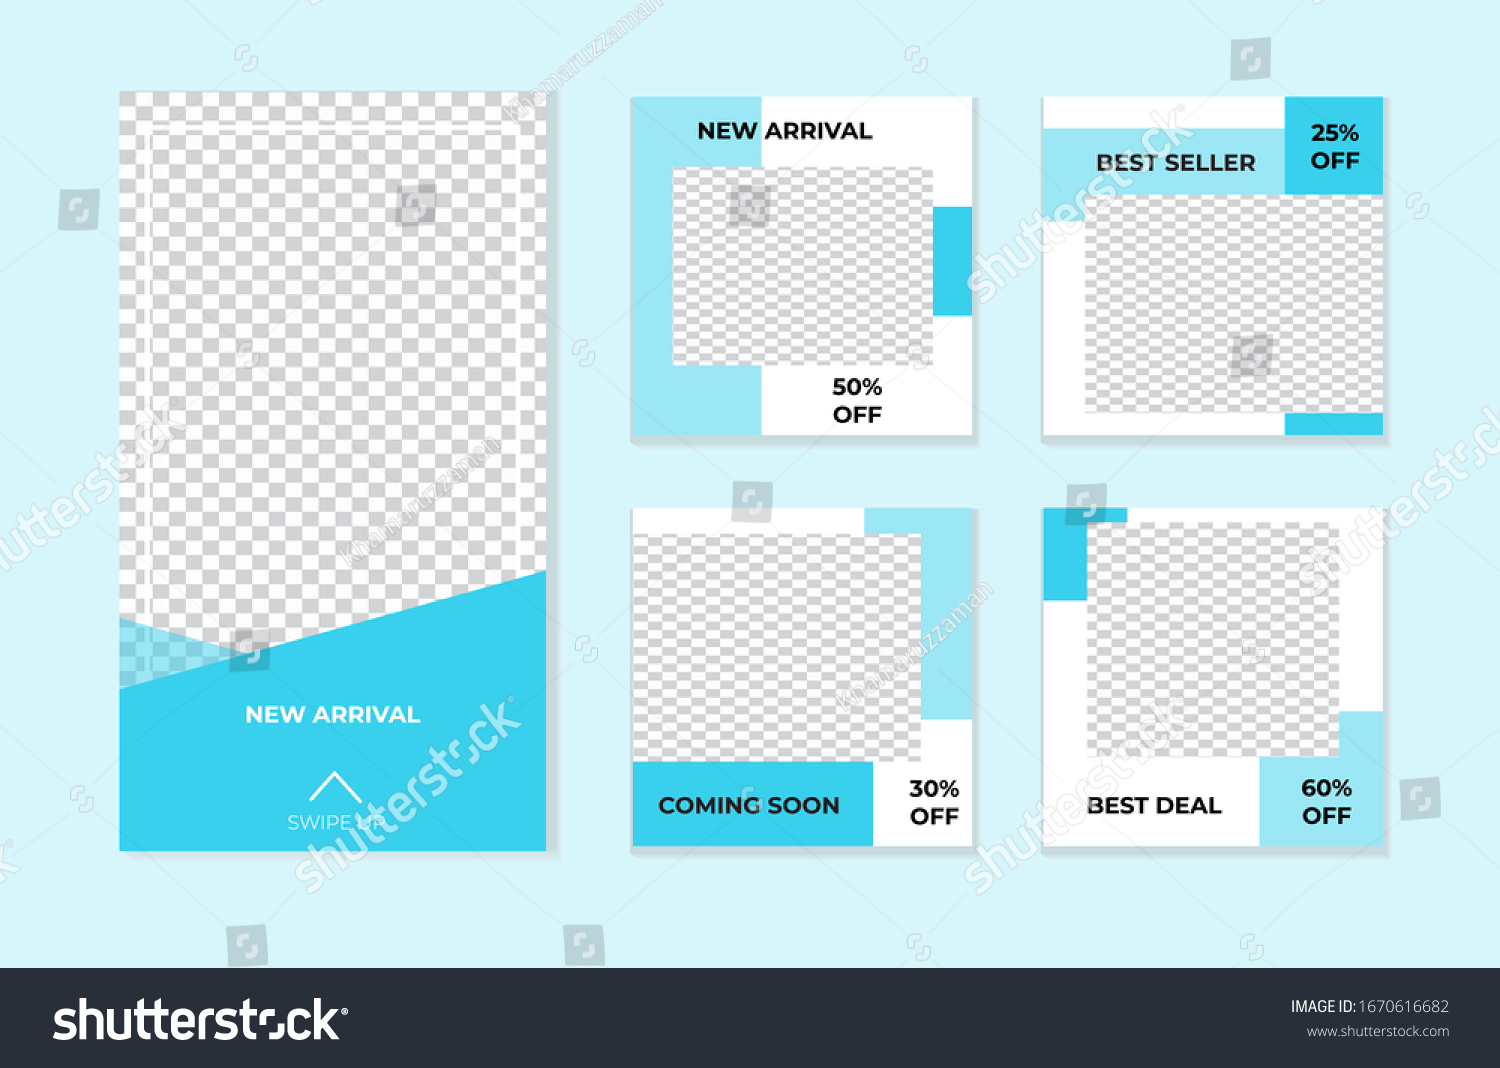 123,015 Architecture poster template Images, Stock Photos & Vectors ...